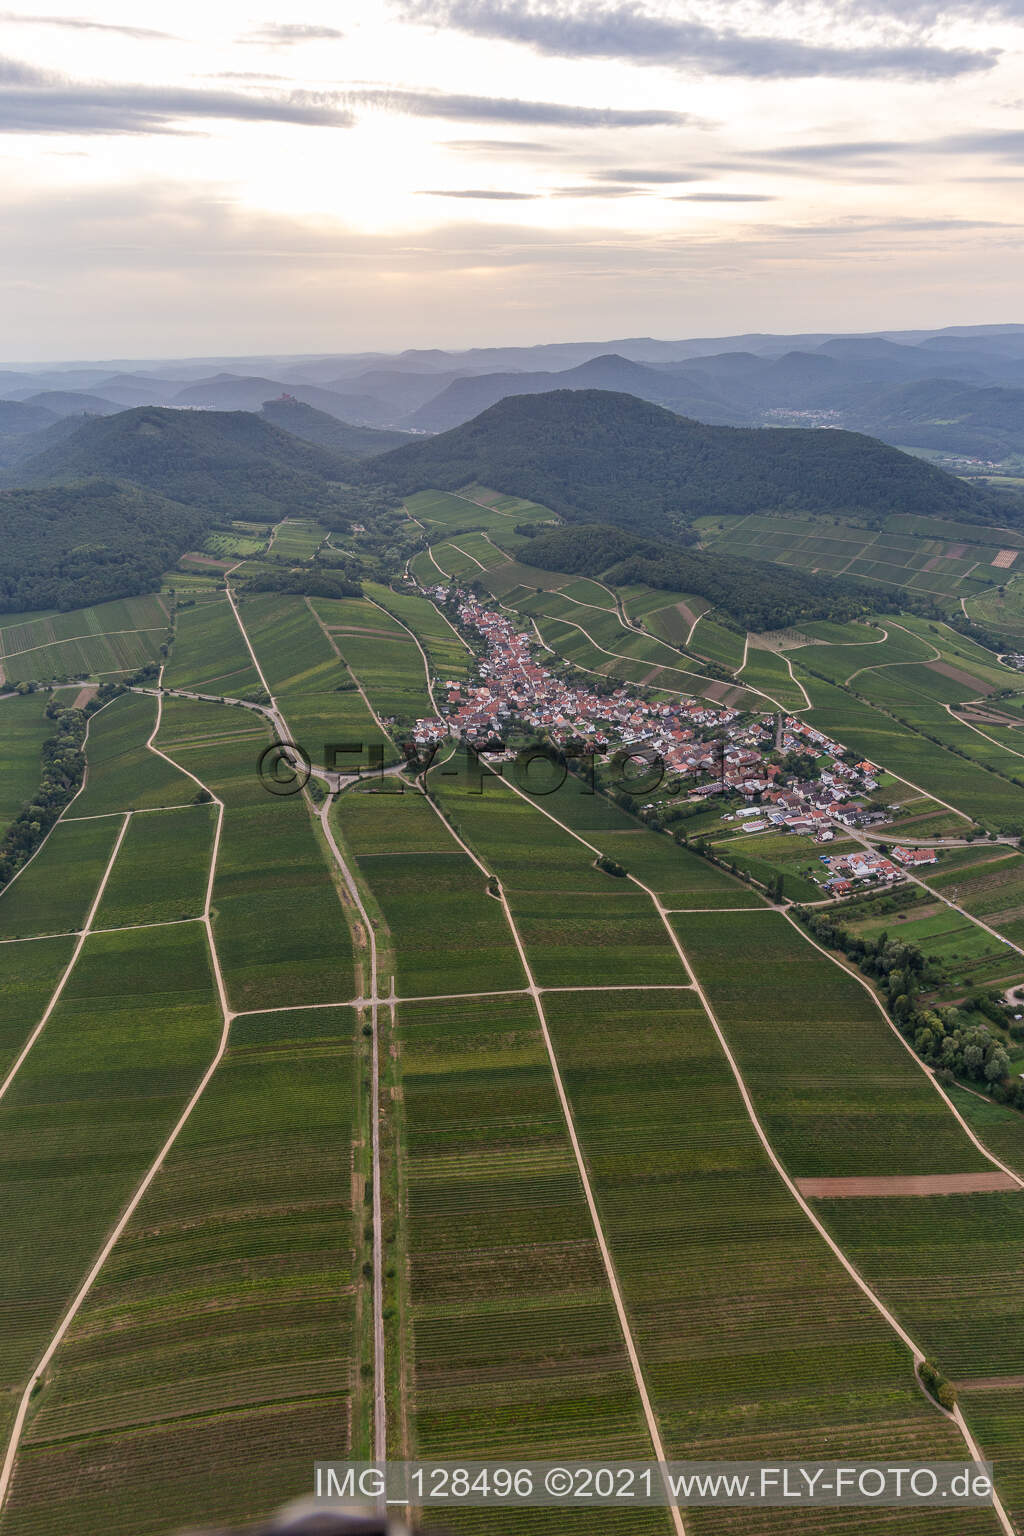 Drone recording of Ranschbach in the state Rhineland-Palatinate, Germany